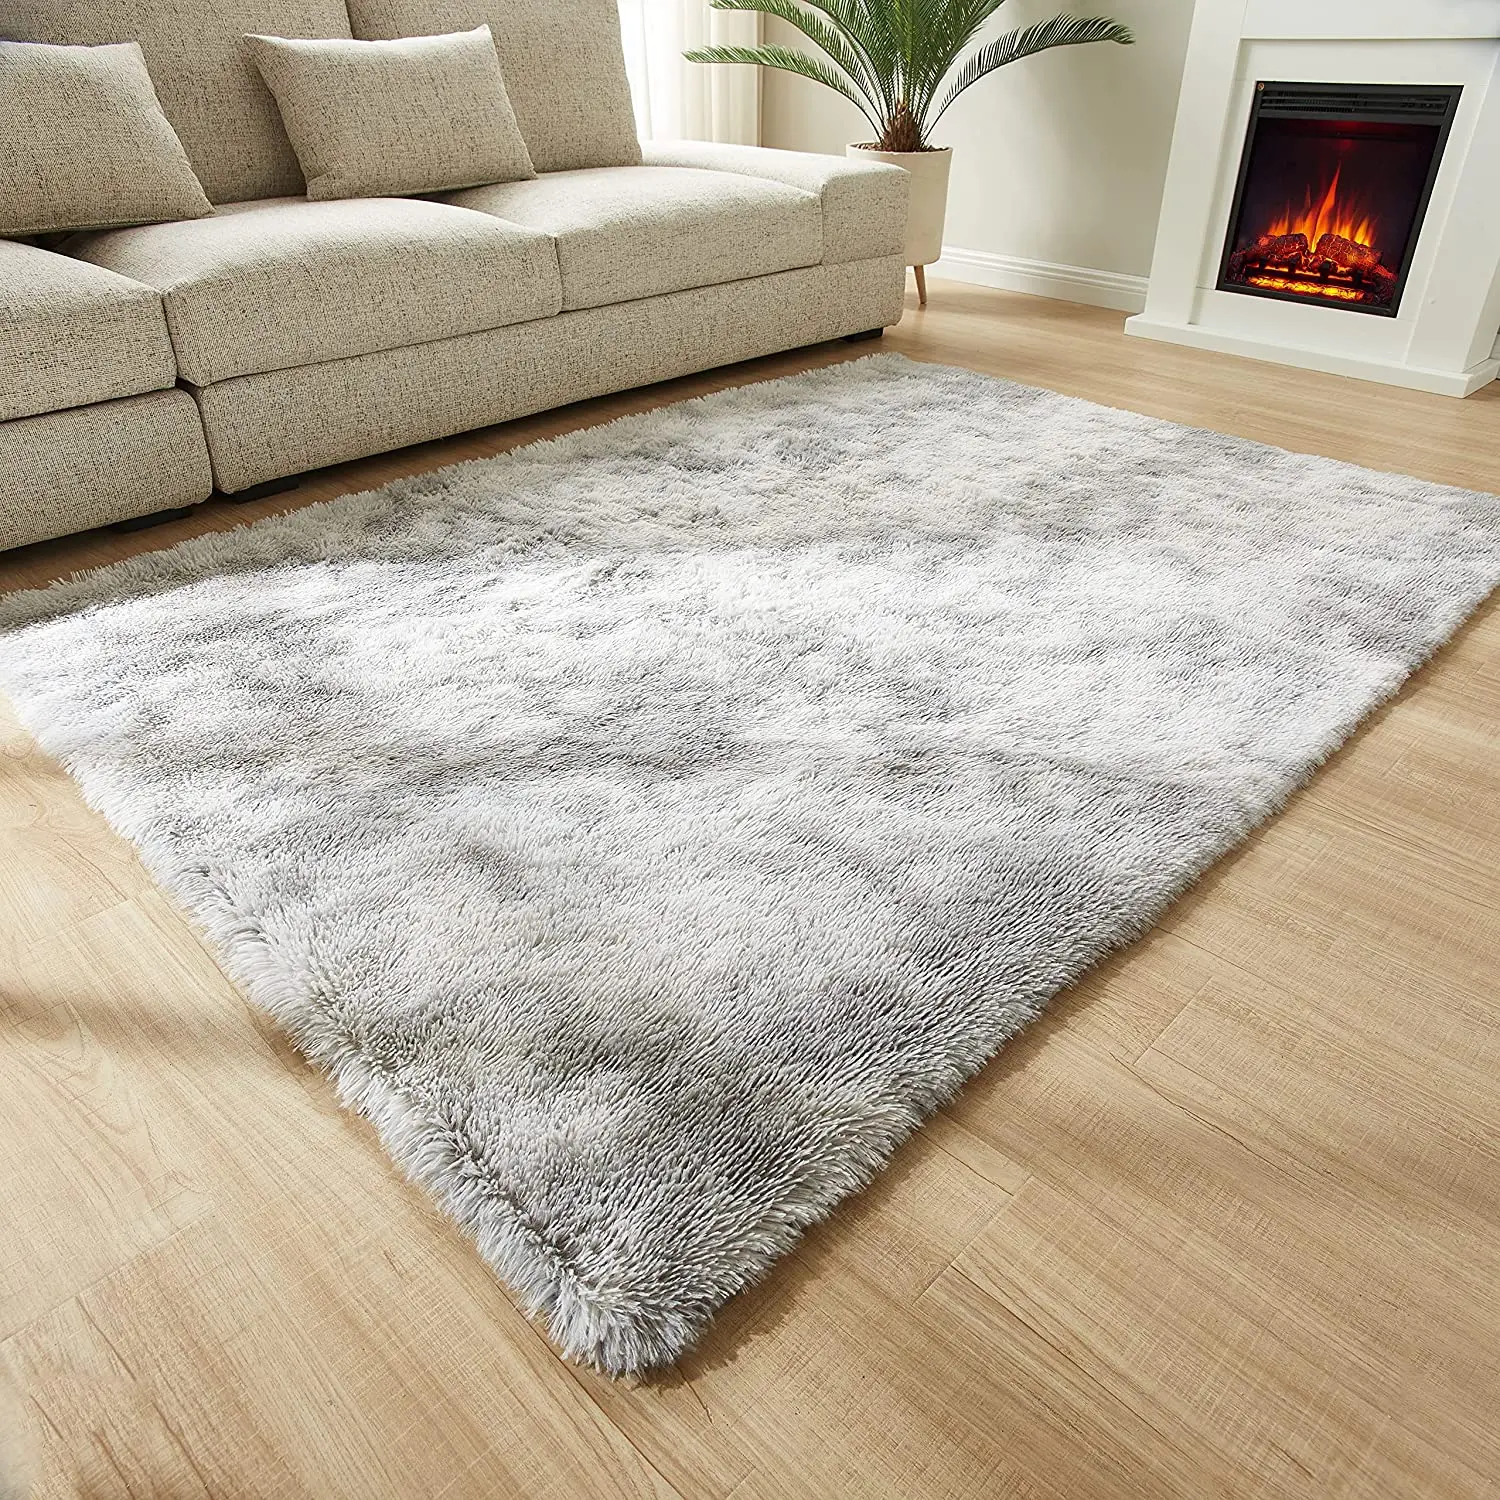 

Bubble Kiss Soft Fluffy Rug In The Living Room Shaggy Large Carpets And Rugs For Bedroom Home Decor 4CM Long Pile Floor Mat